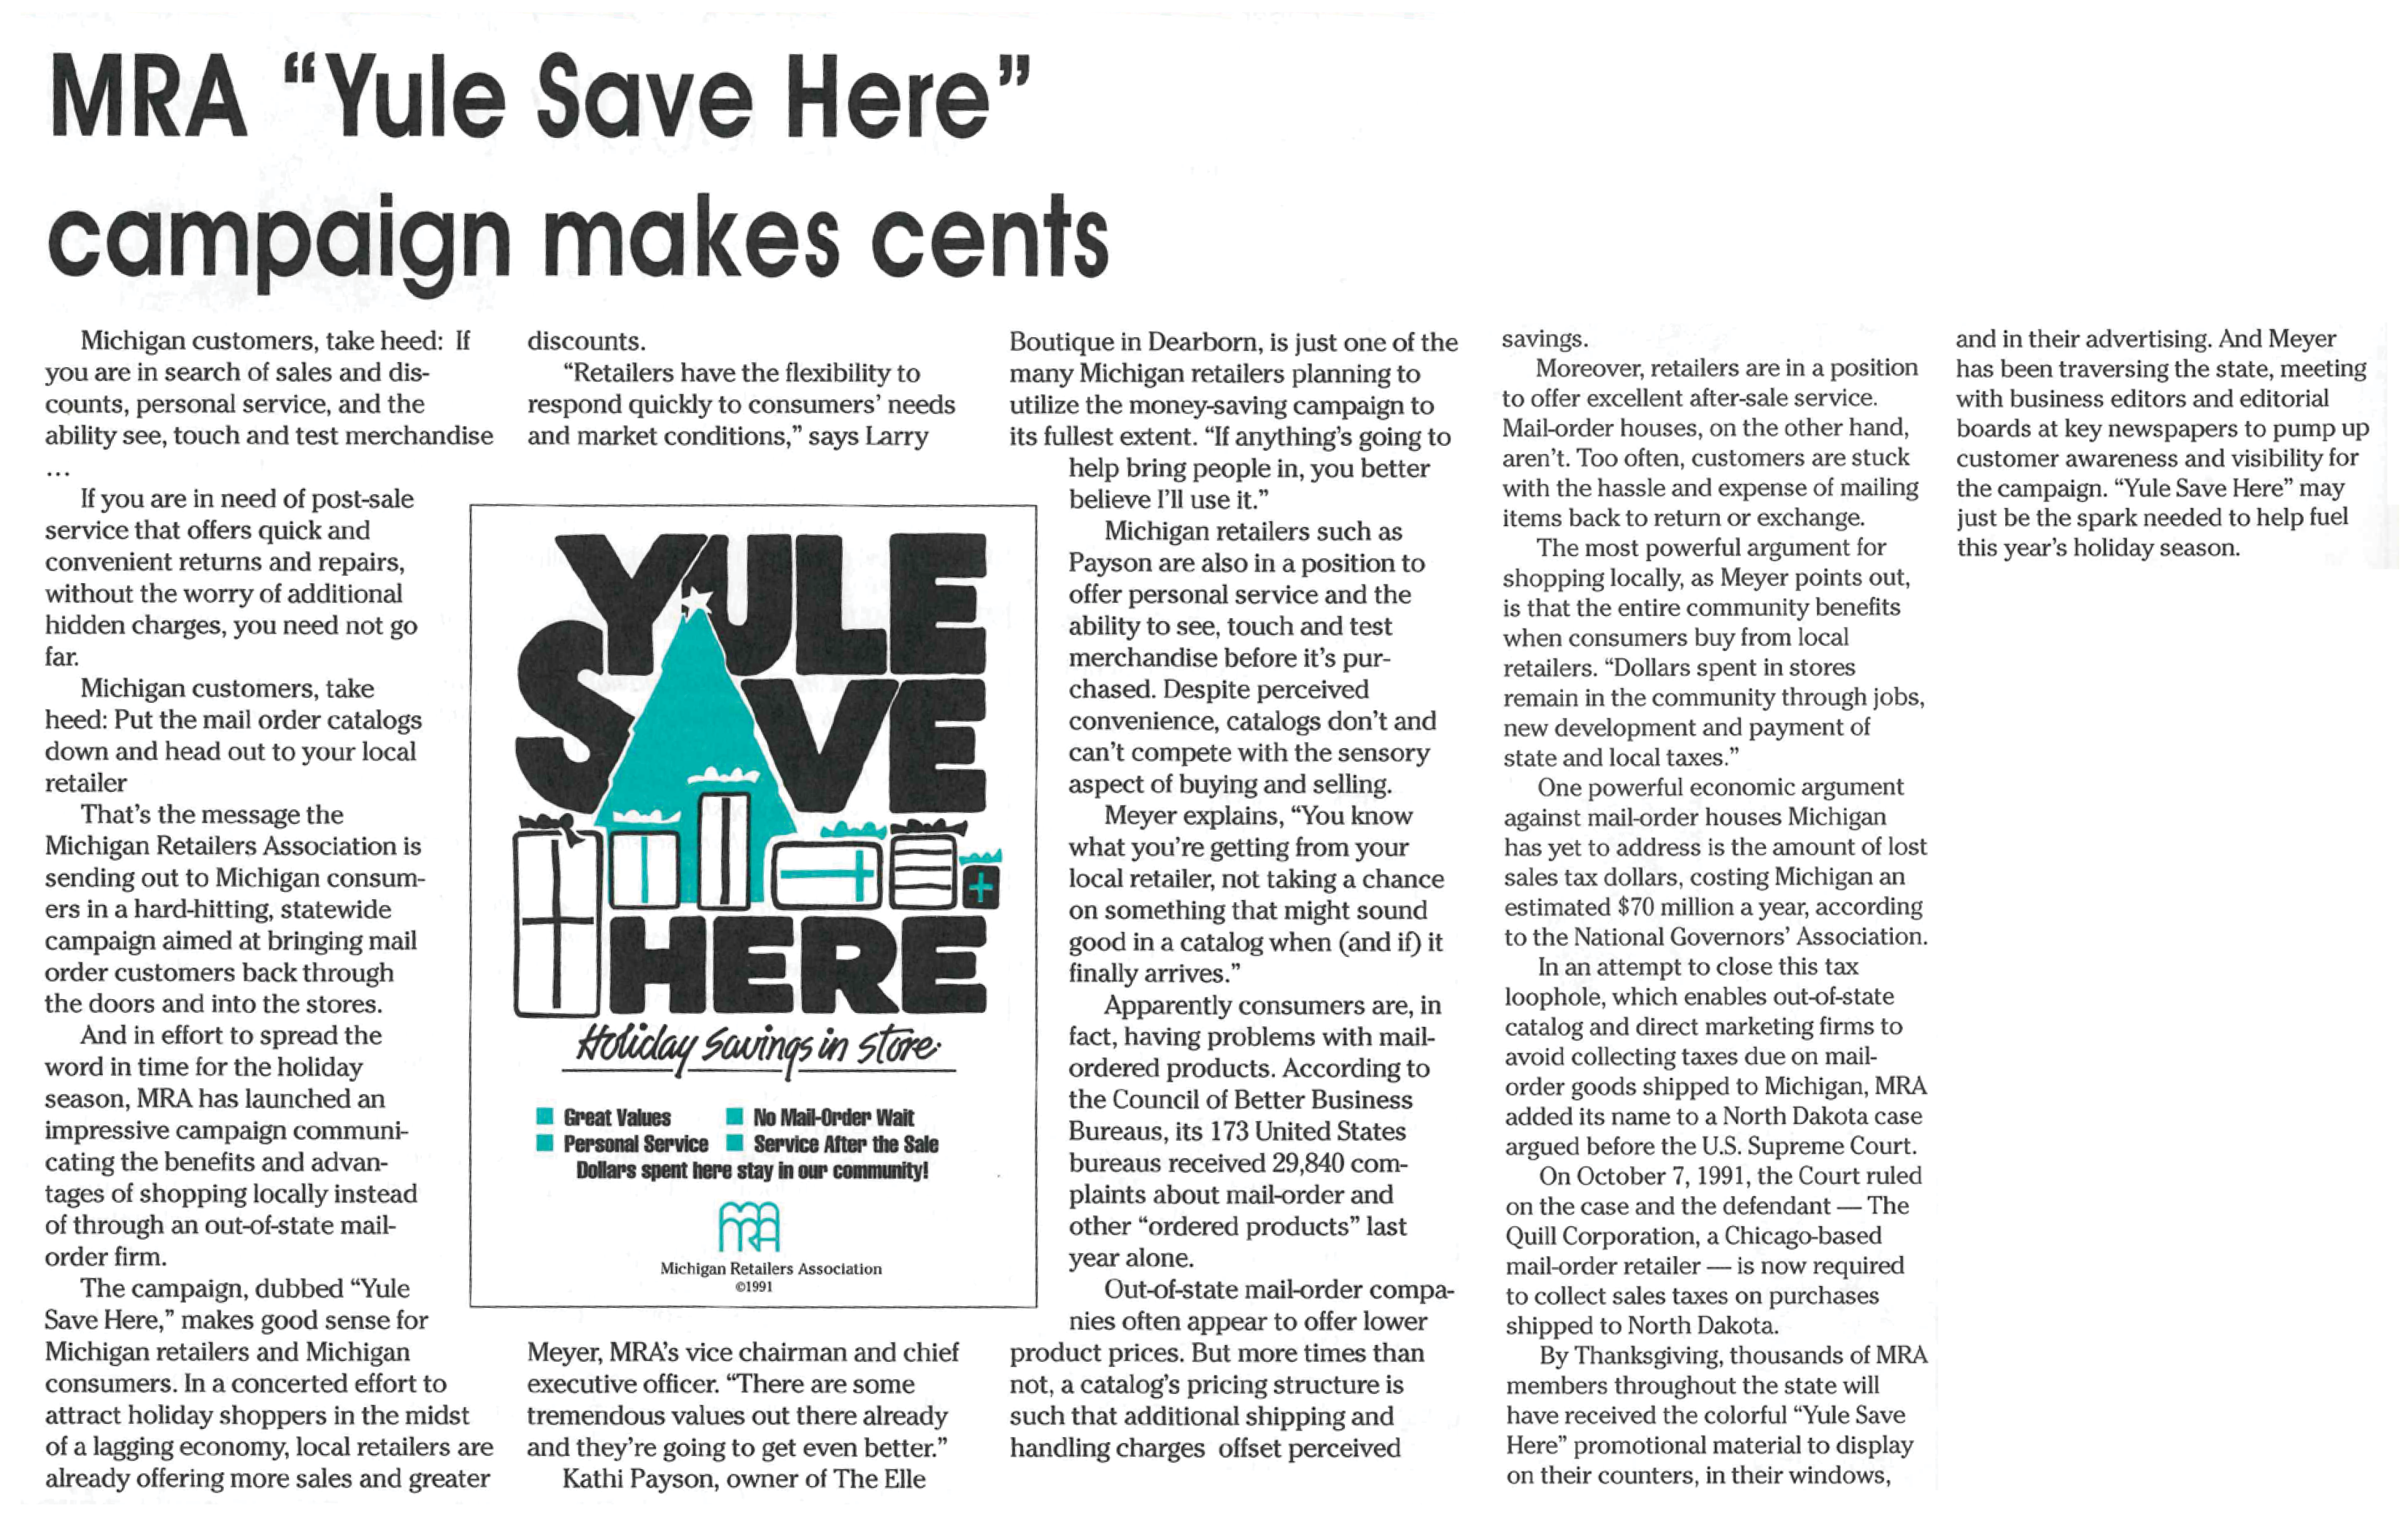 Yule Save Here Article, 1991